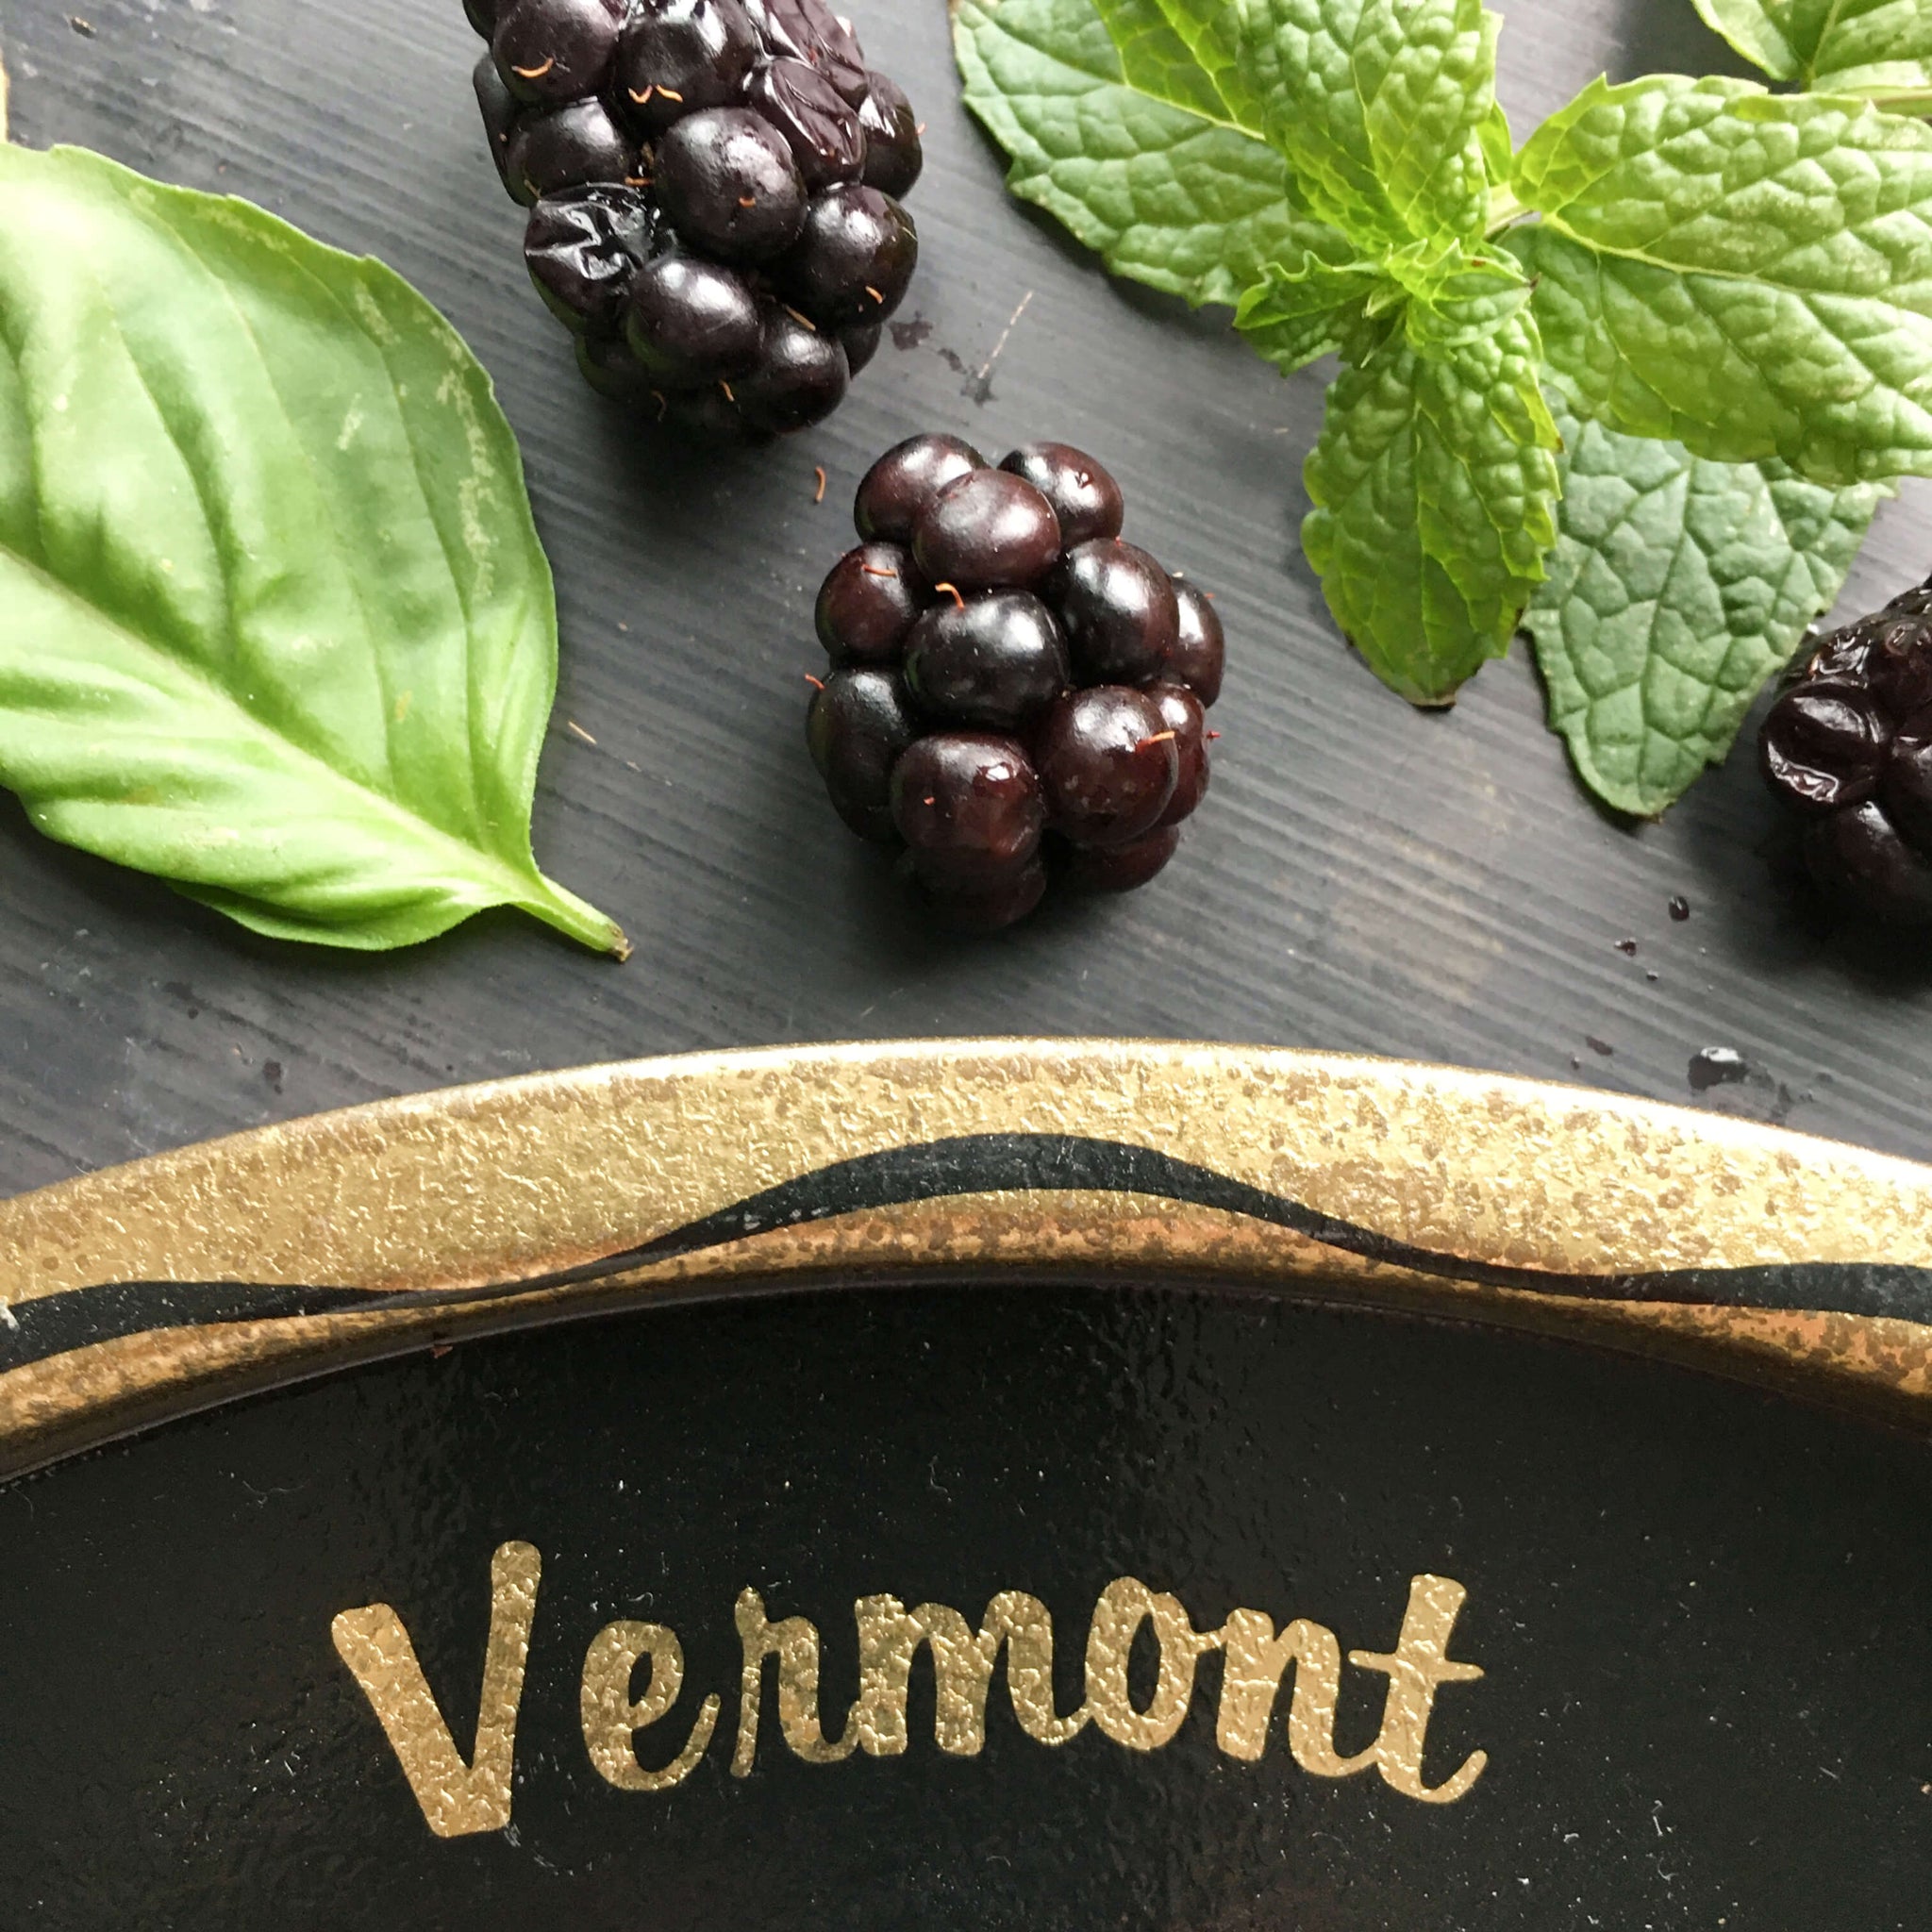 Vintage 1960's Vermont New Hampshire Tin Tray - Travel Souvenir - Black and Gold Travel Collectibles